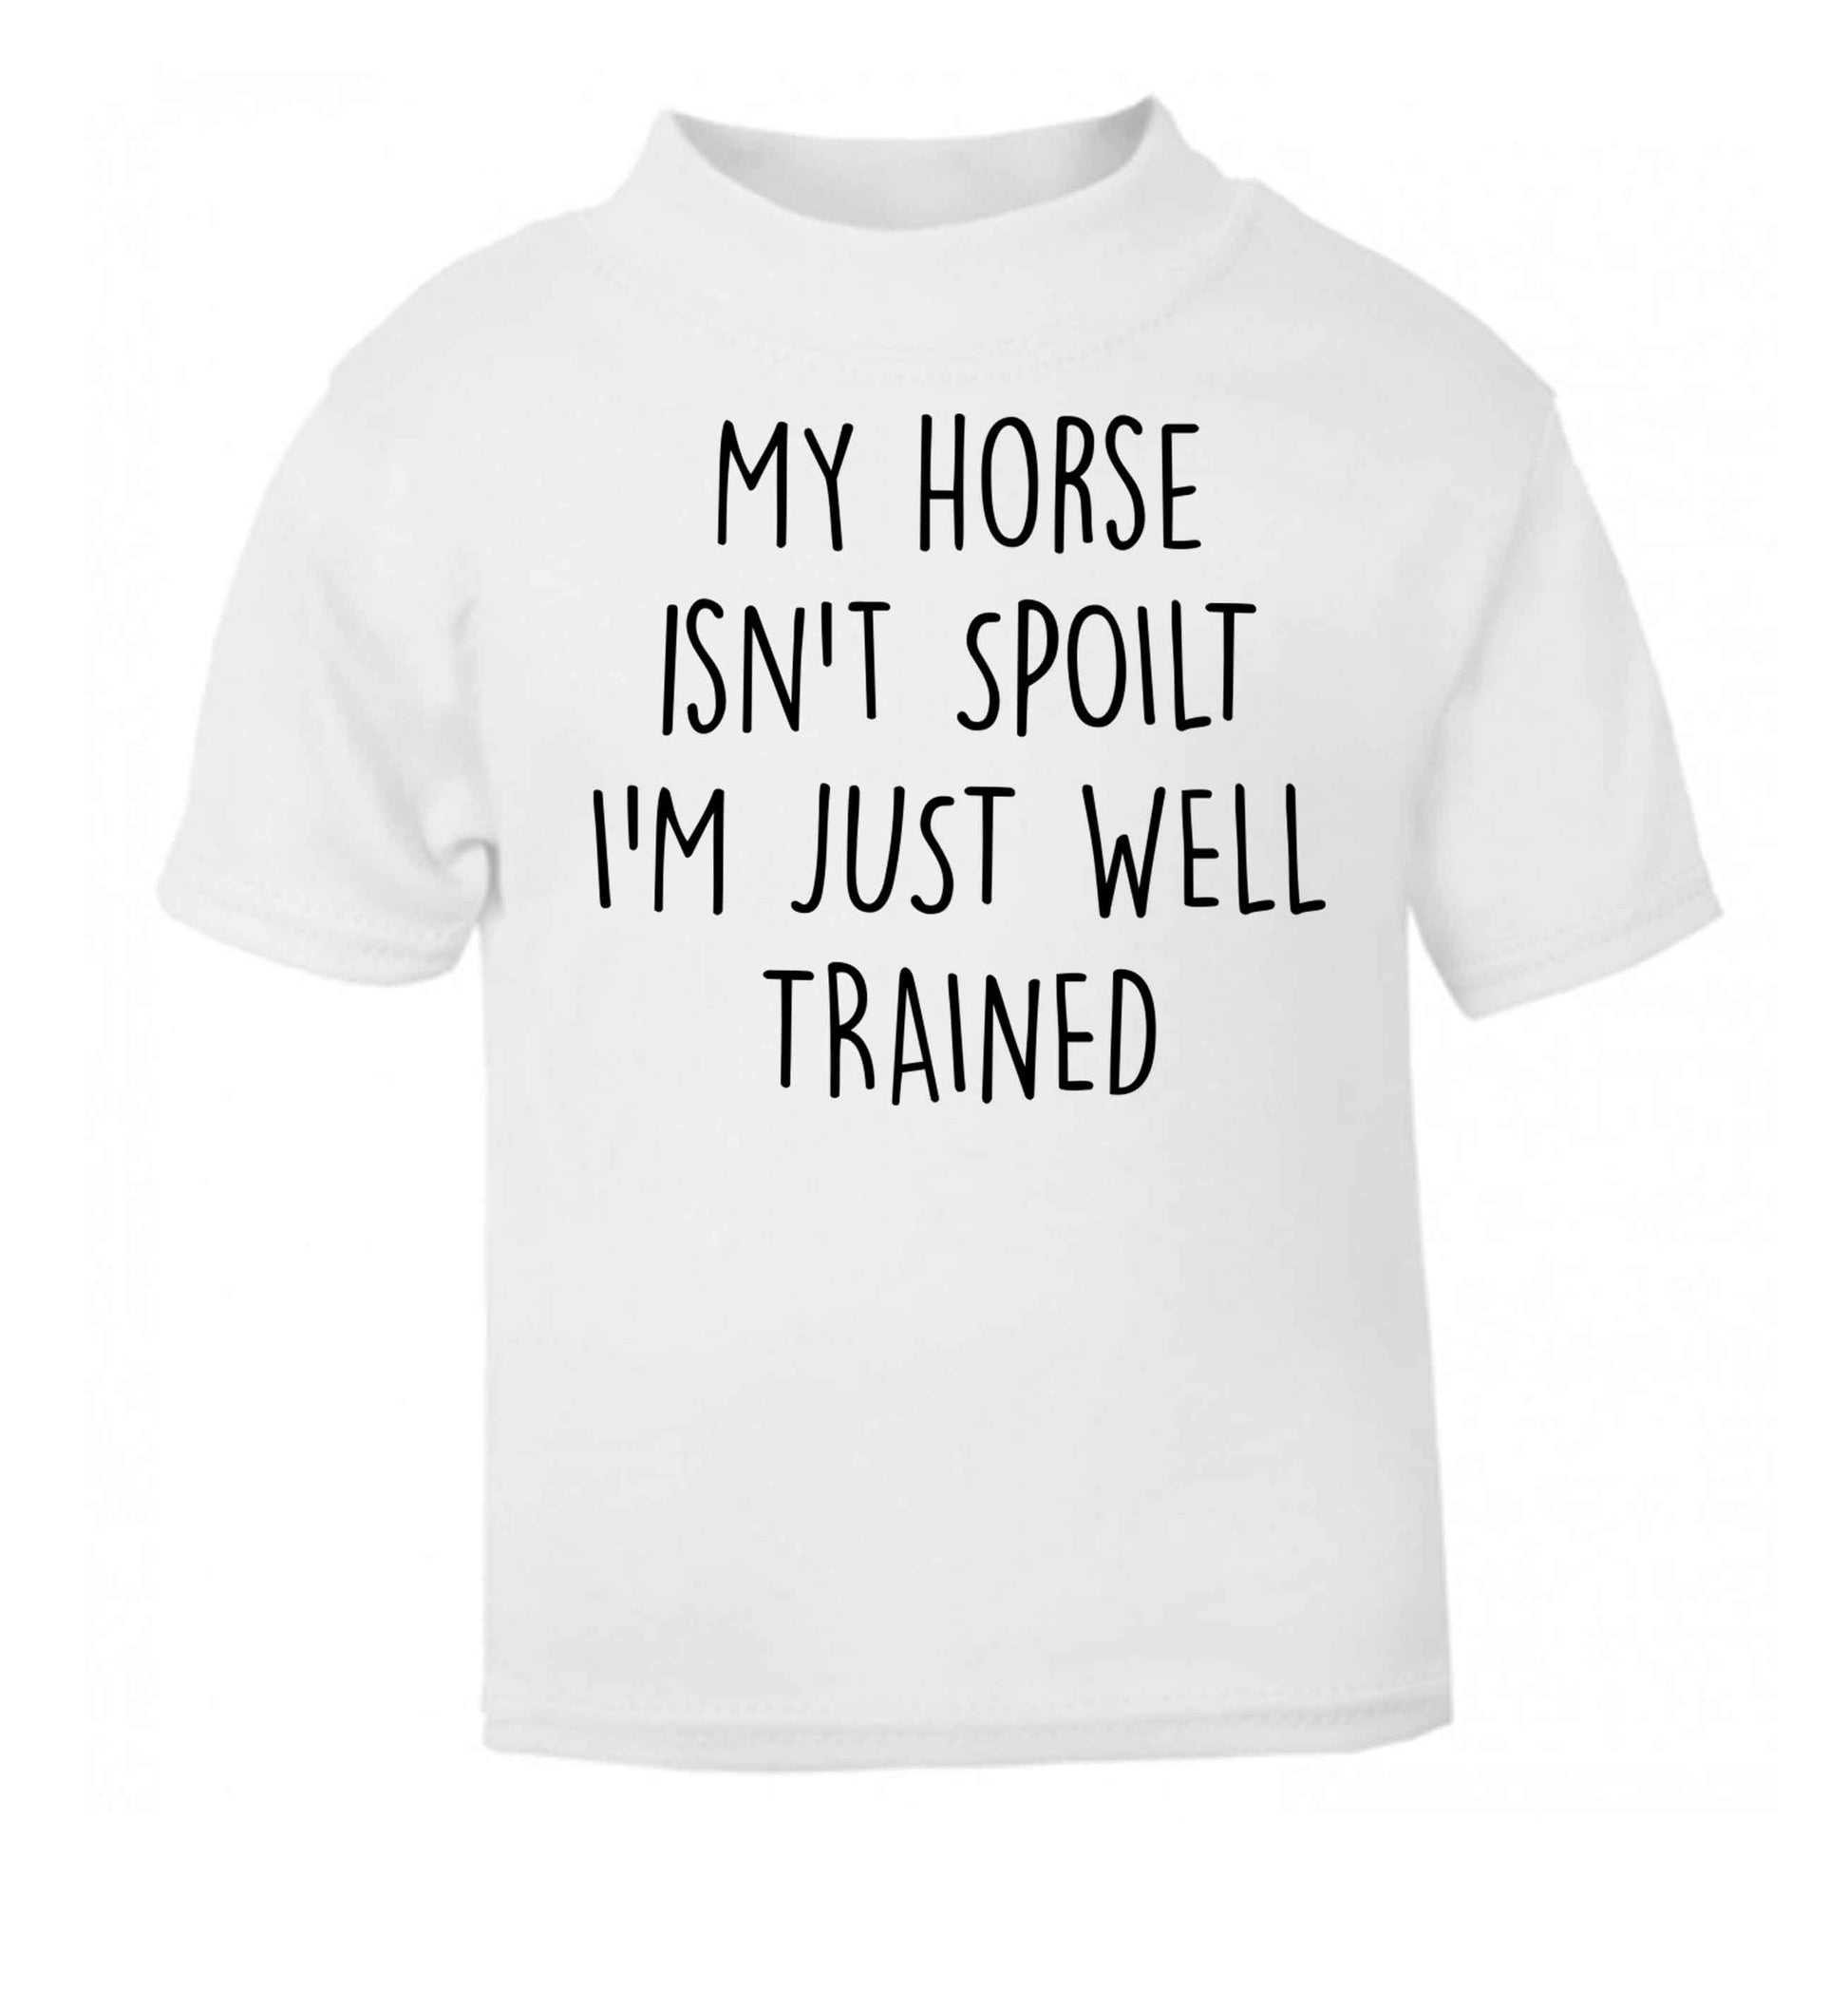 My horse isn't spoilt I'm just well trained white baby toddler Tshirt 2 Years